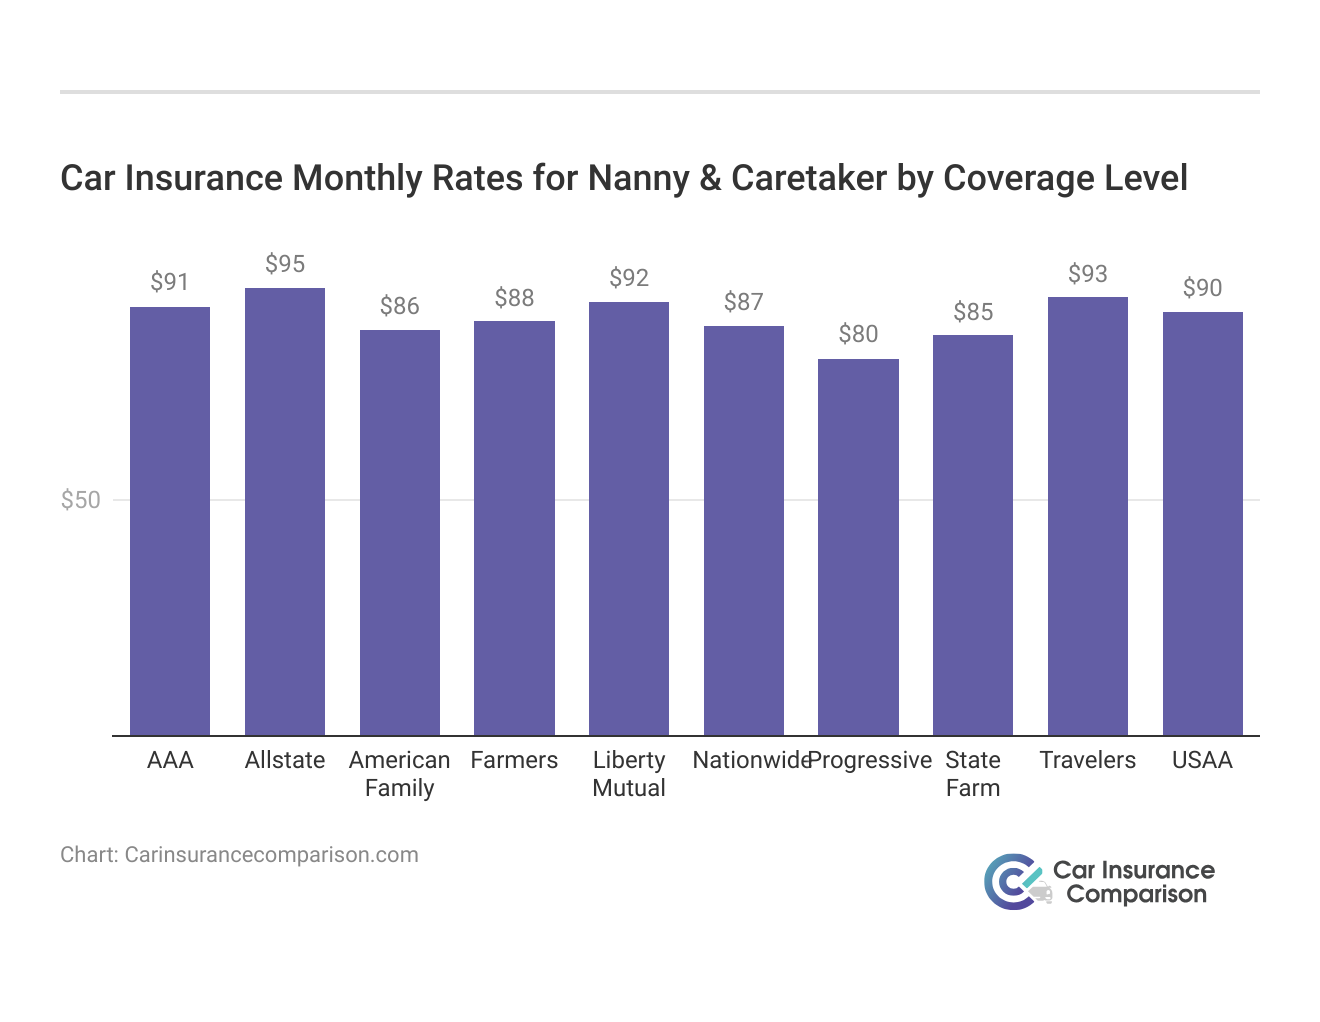 <h3>Car Insurance Monthly Rates for Nanny & Caretaker by Coverage Level</h3>